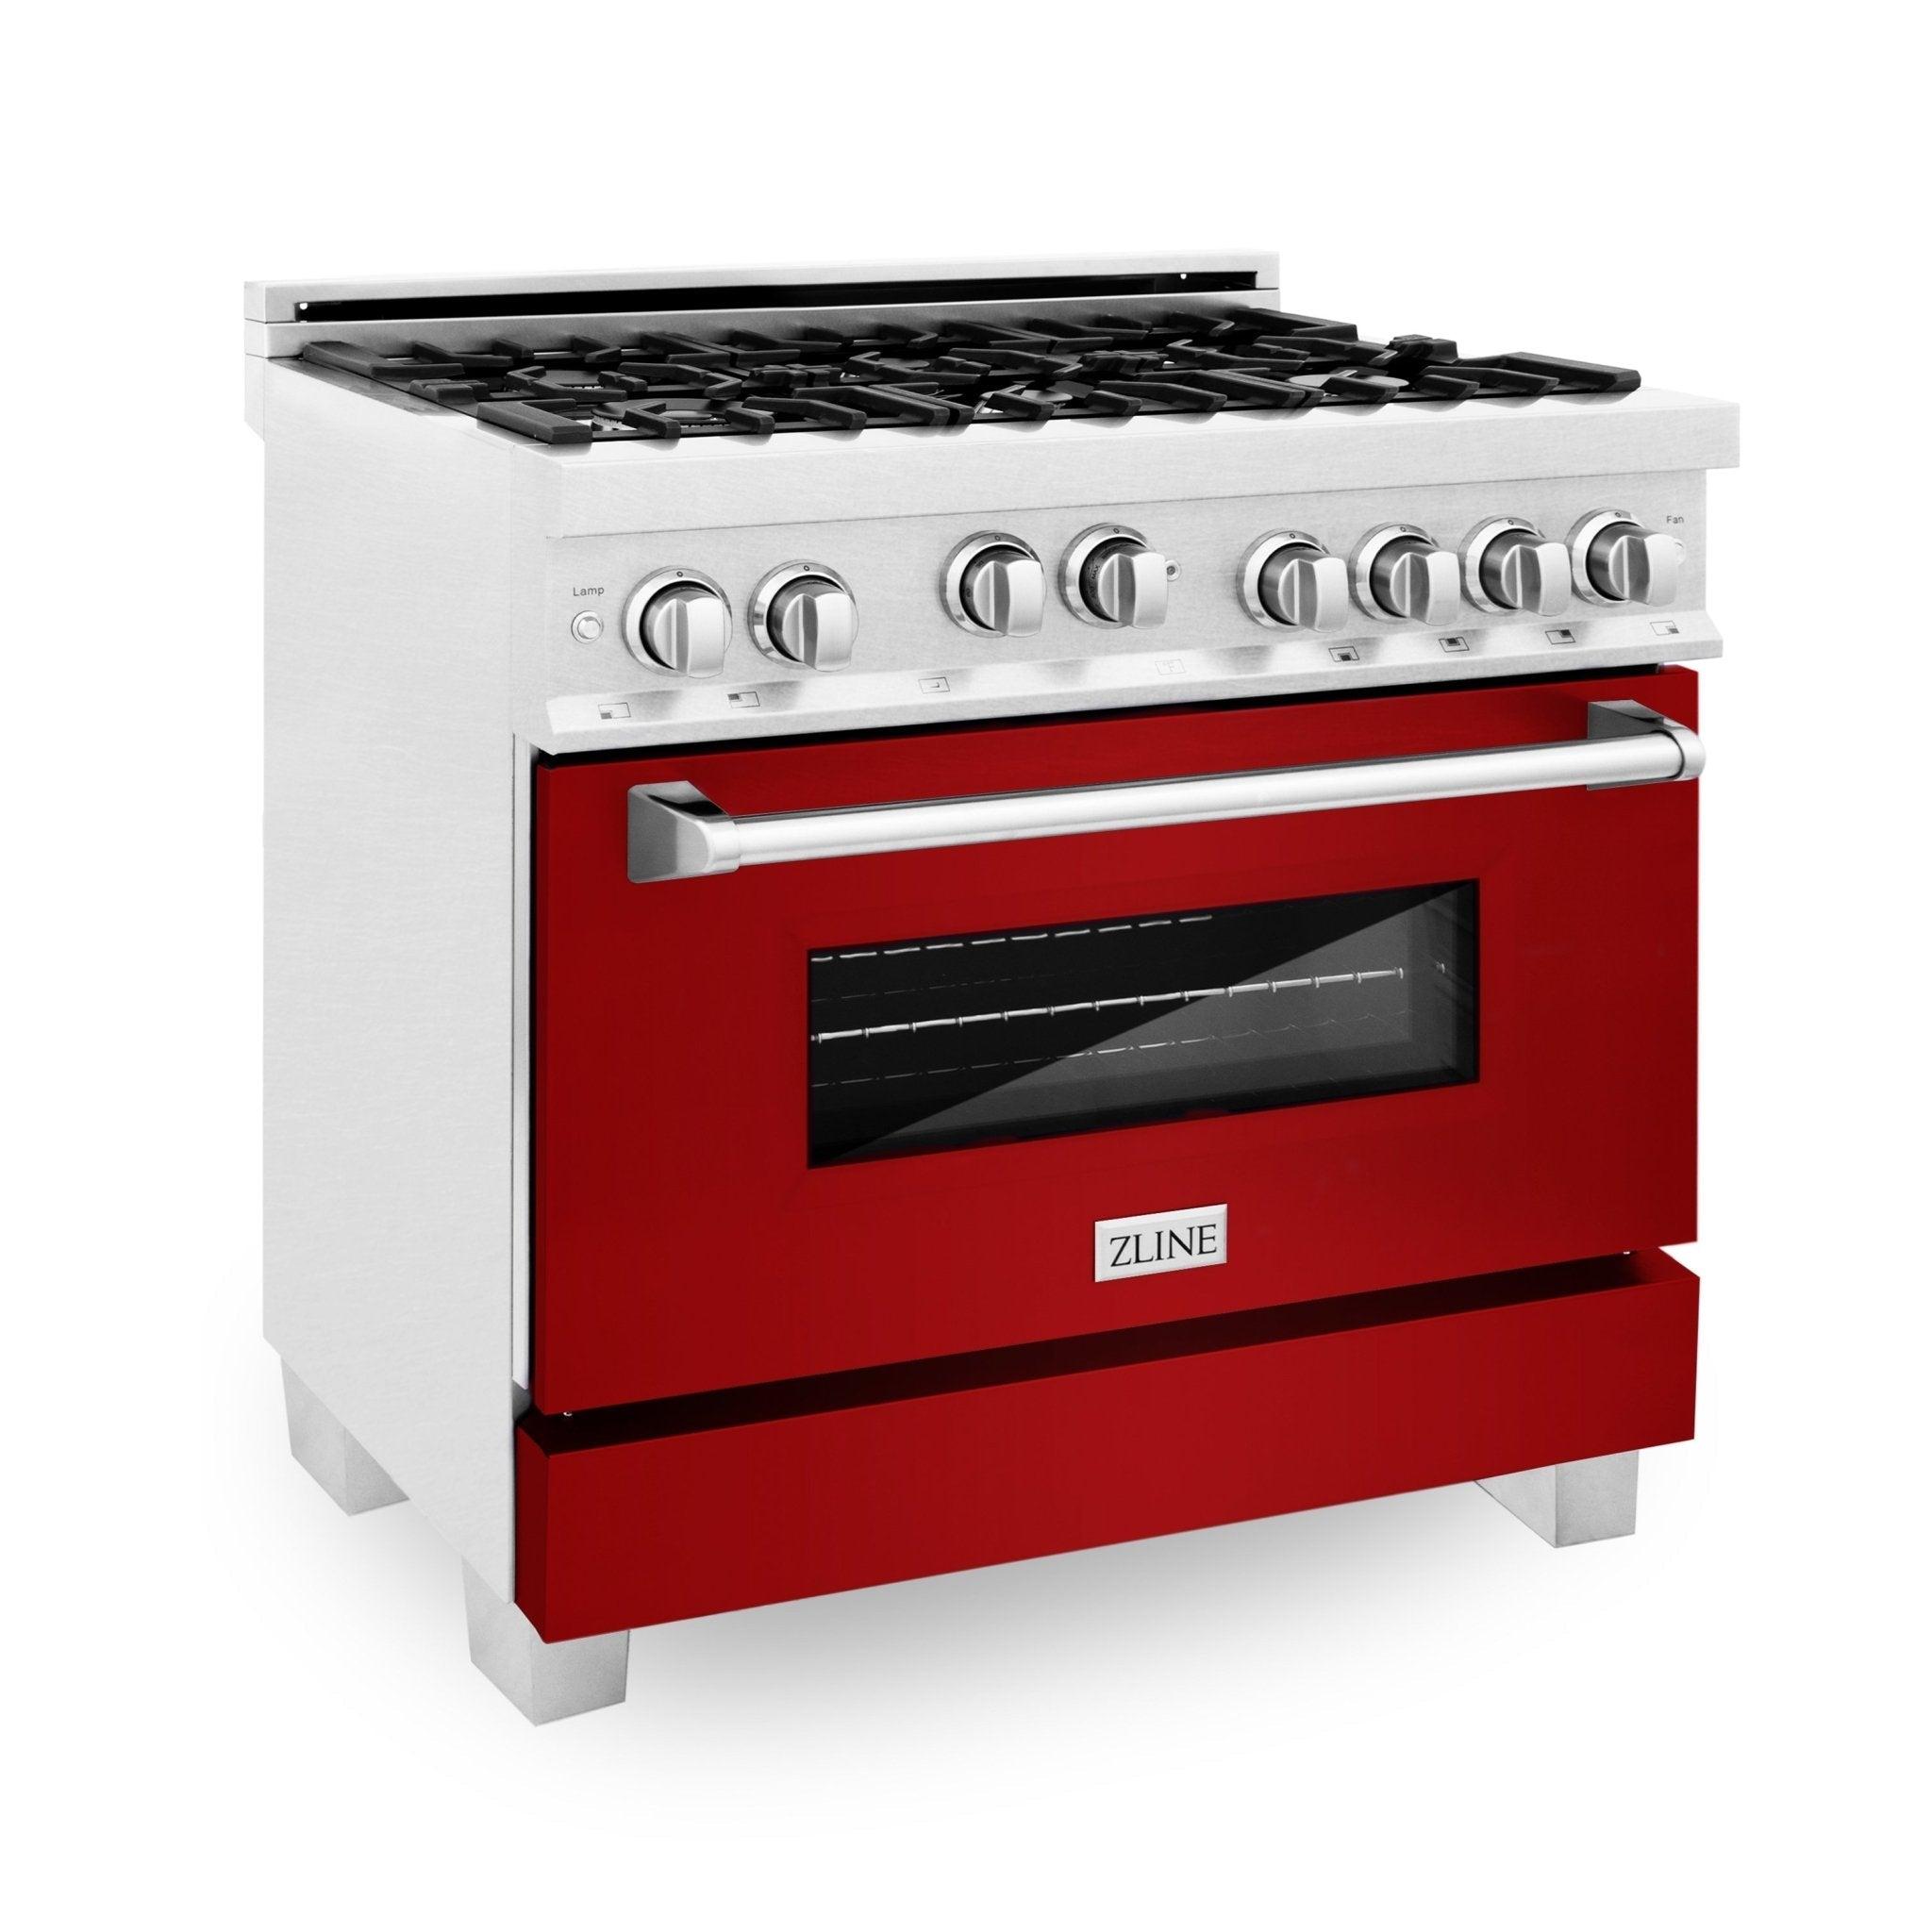 ZLINE KITCHEN AND BATH RGSRG36 ZLINE 36" Professional 4.6 cu. ft. Gas on Gas Range in ZLINE DuraSnow R Stainless Steel with Color Door Options Color: Red Gloss